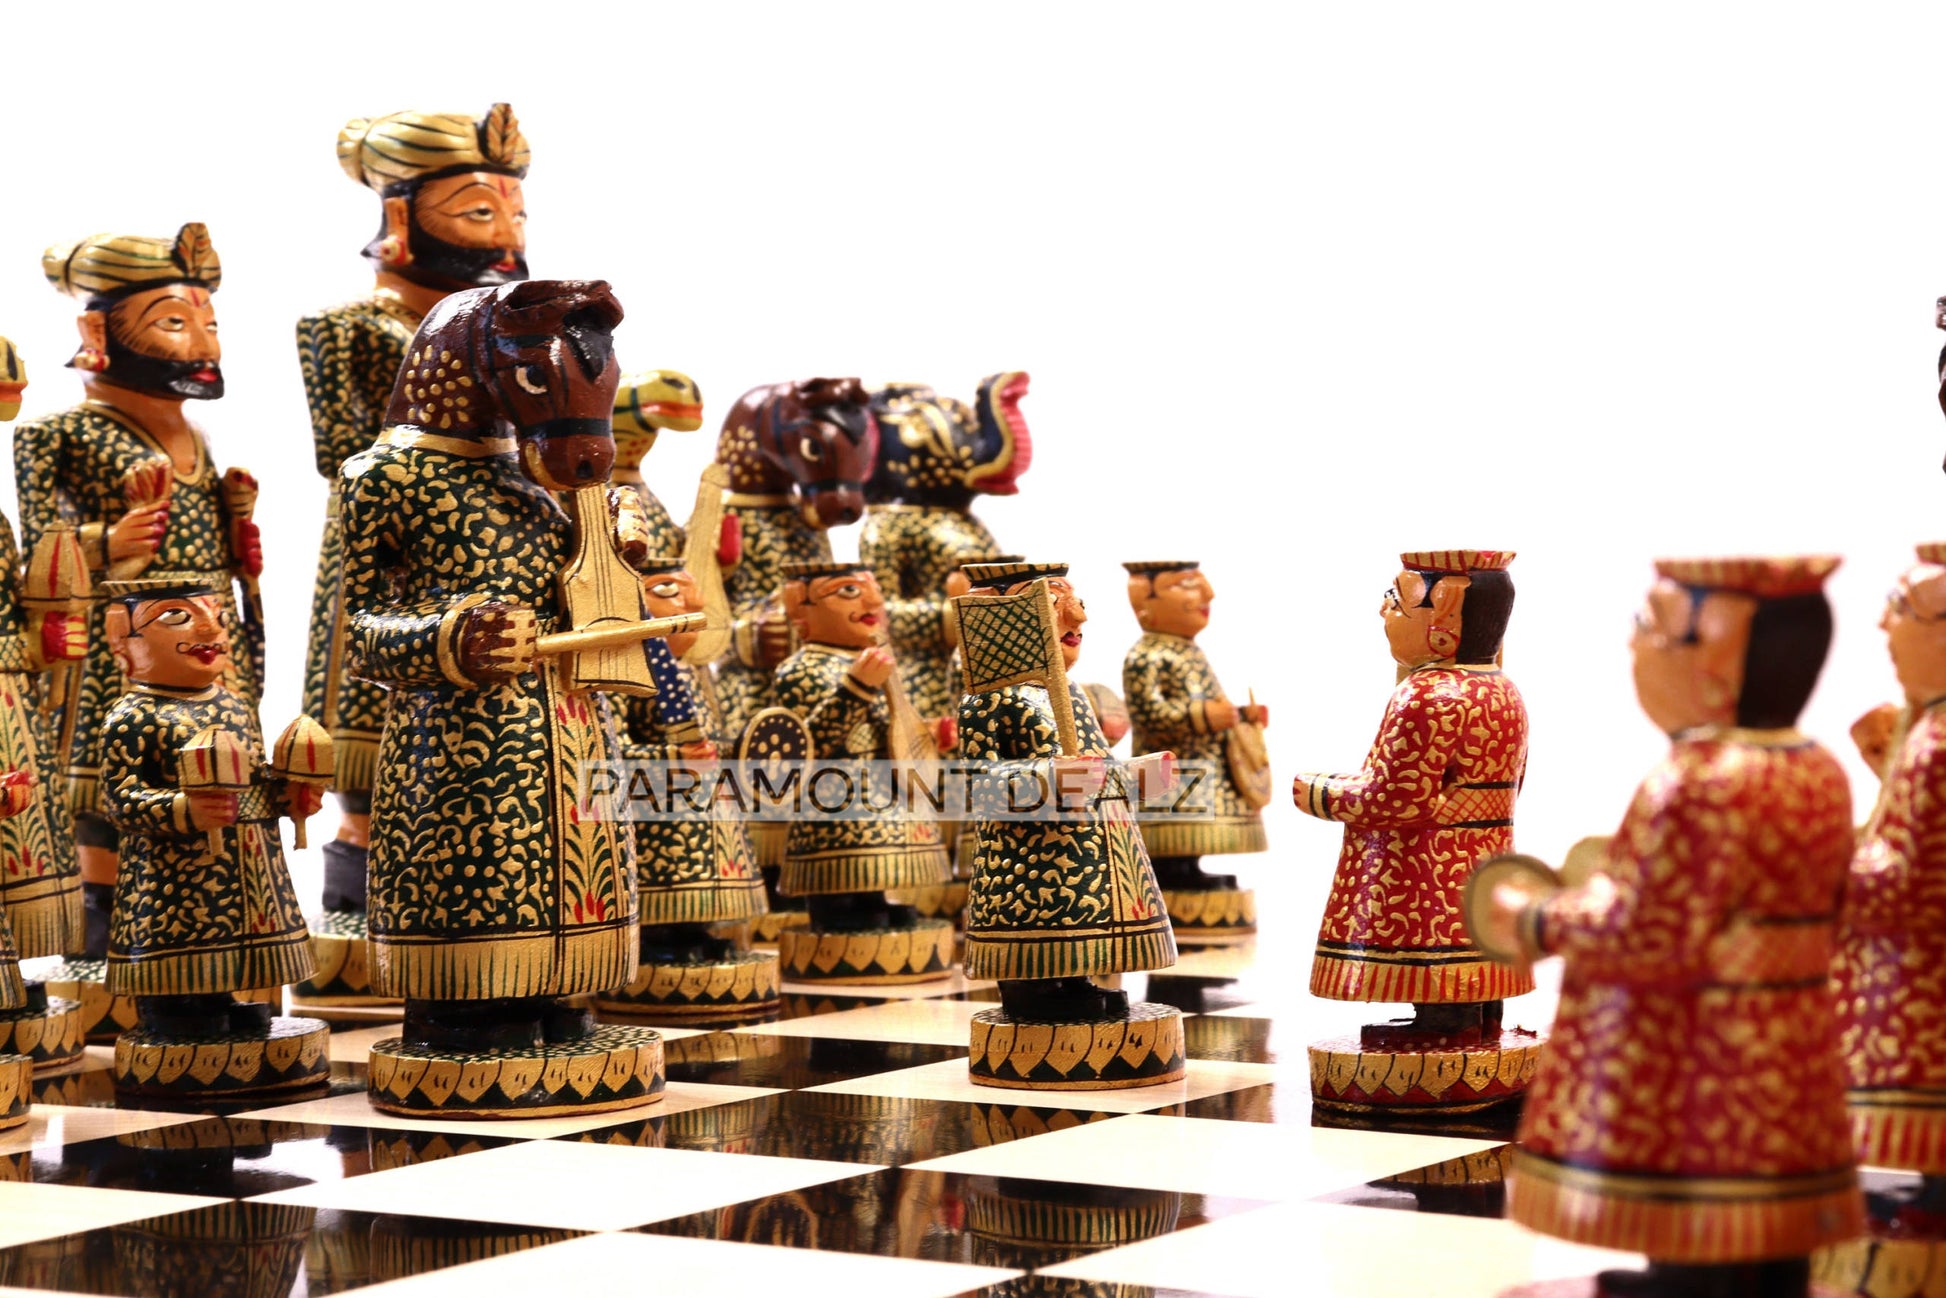  Handcrafted Chess Board